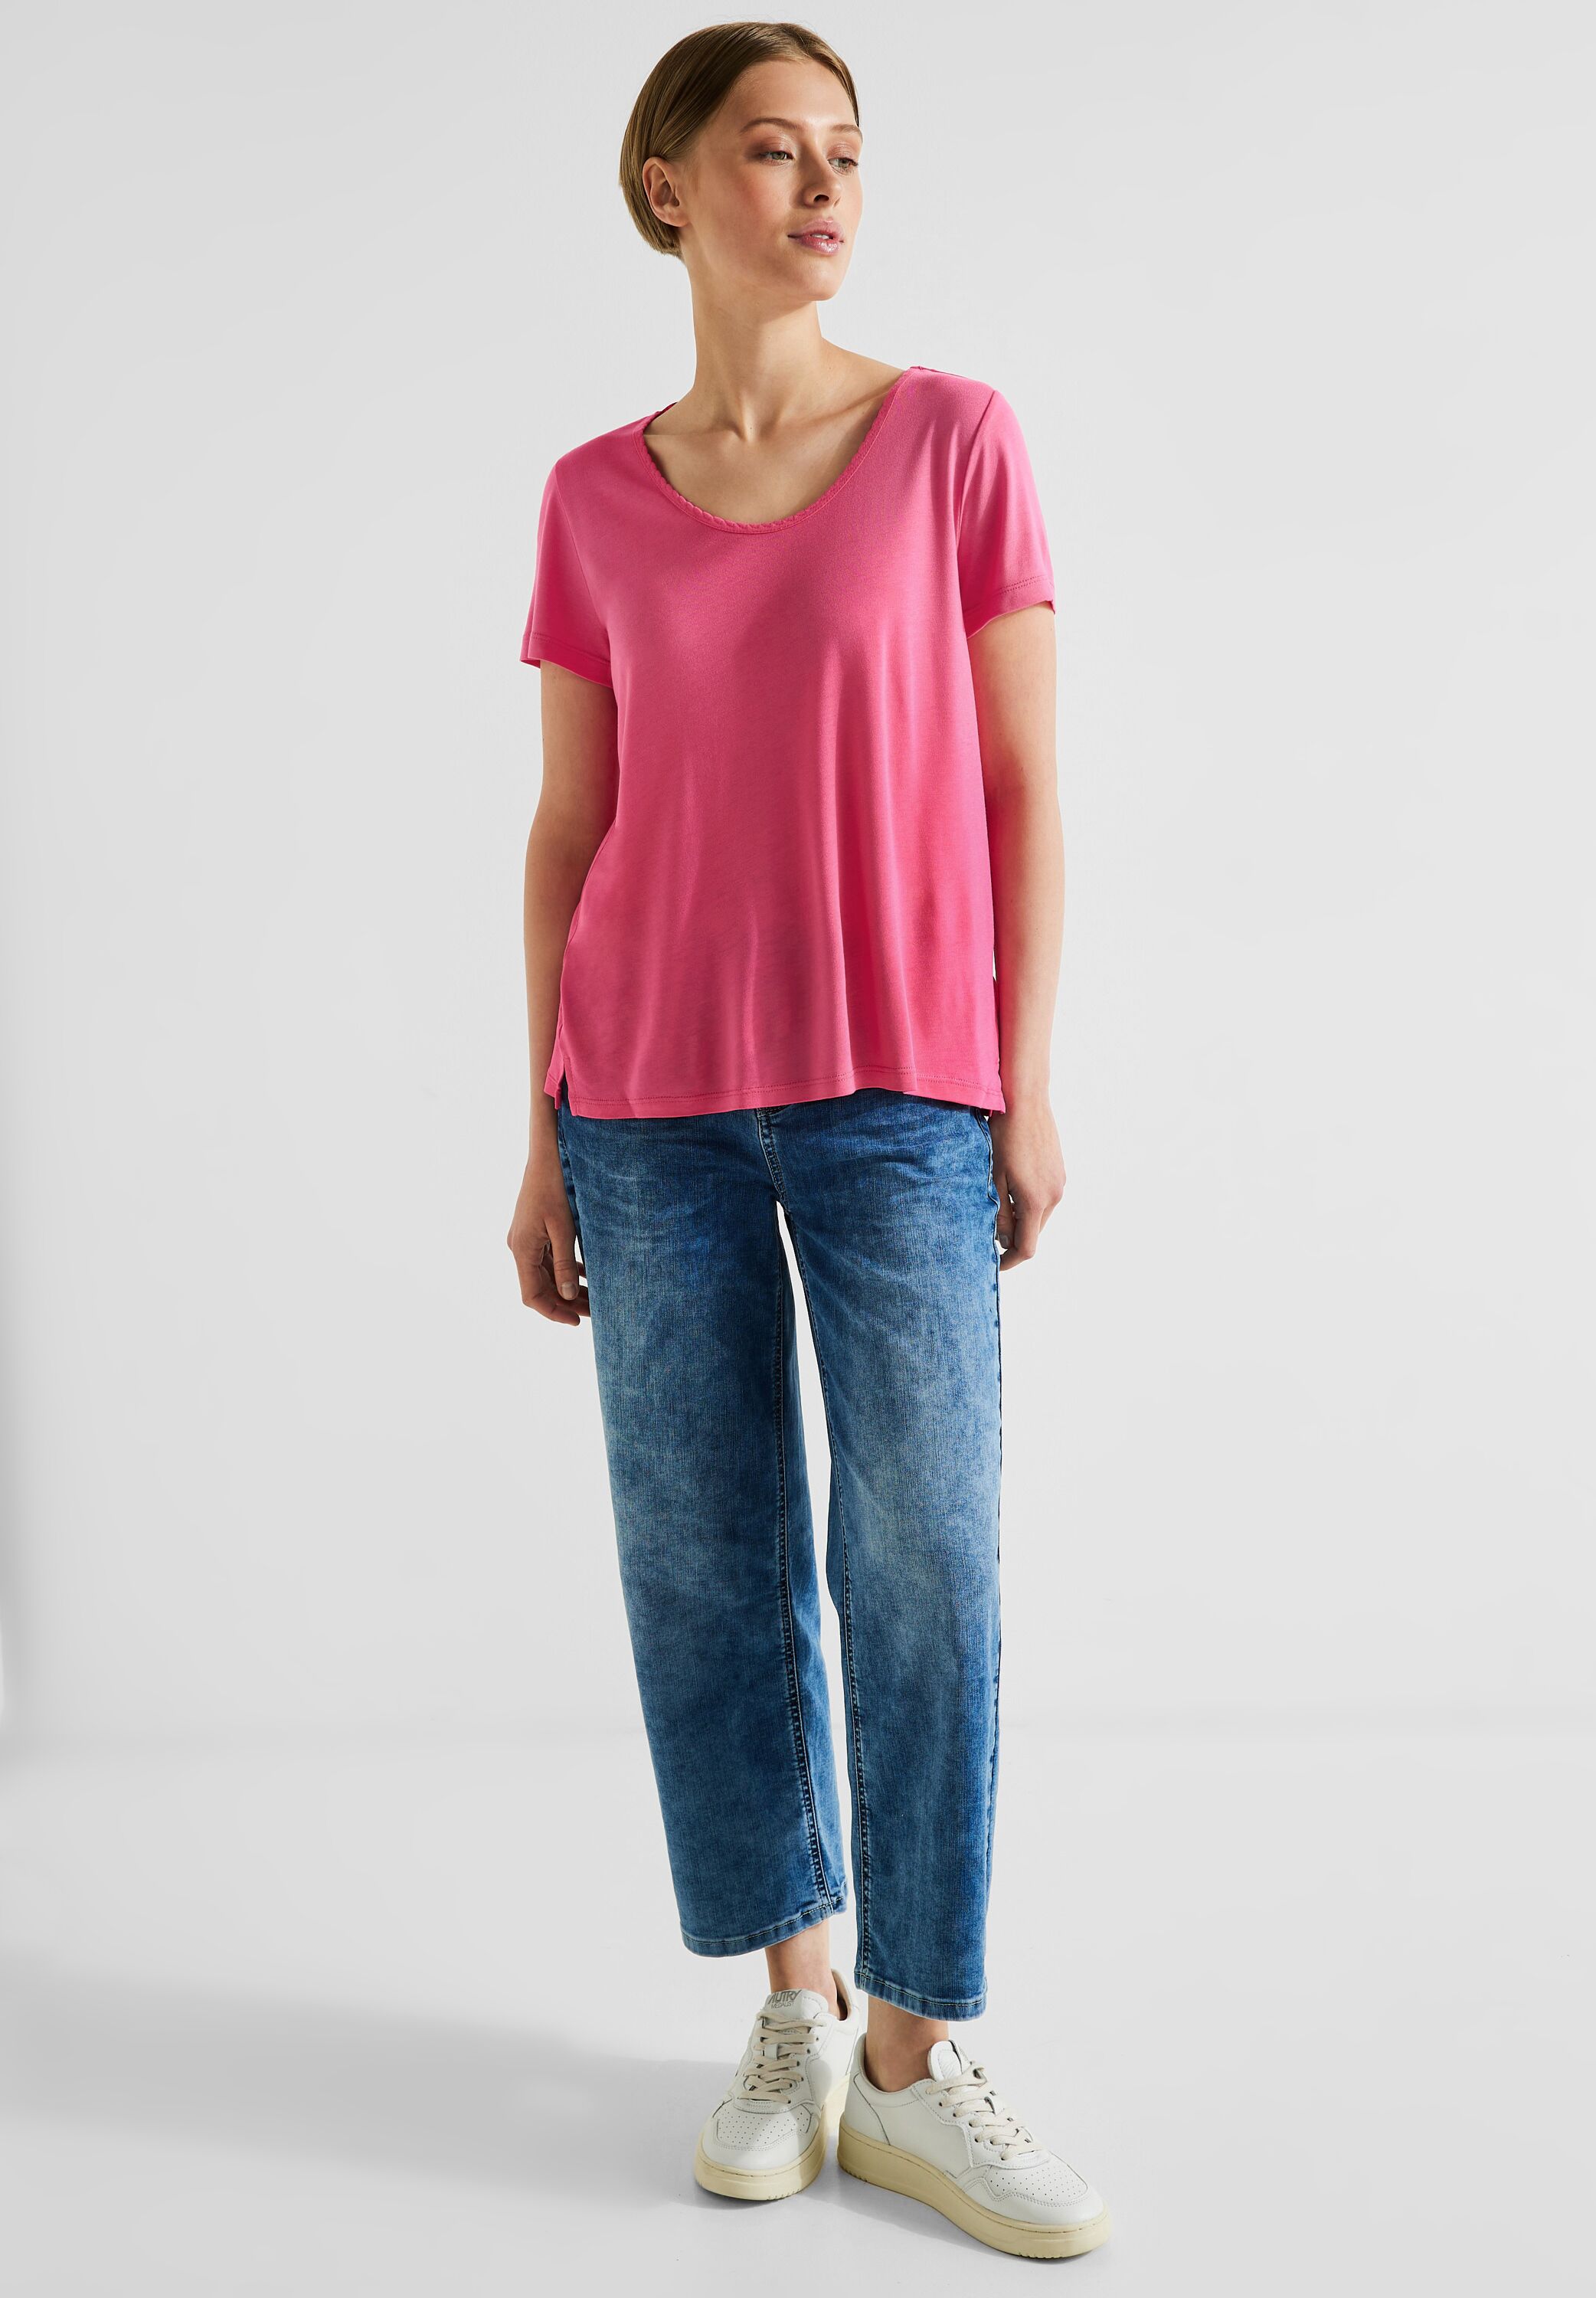 Street One T-Shirt in Berry Mode CONCEPT Rose A320124-14647 - reduziert SALE im